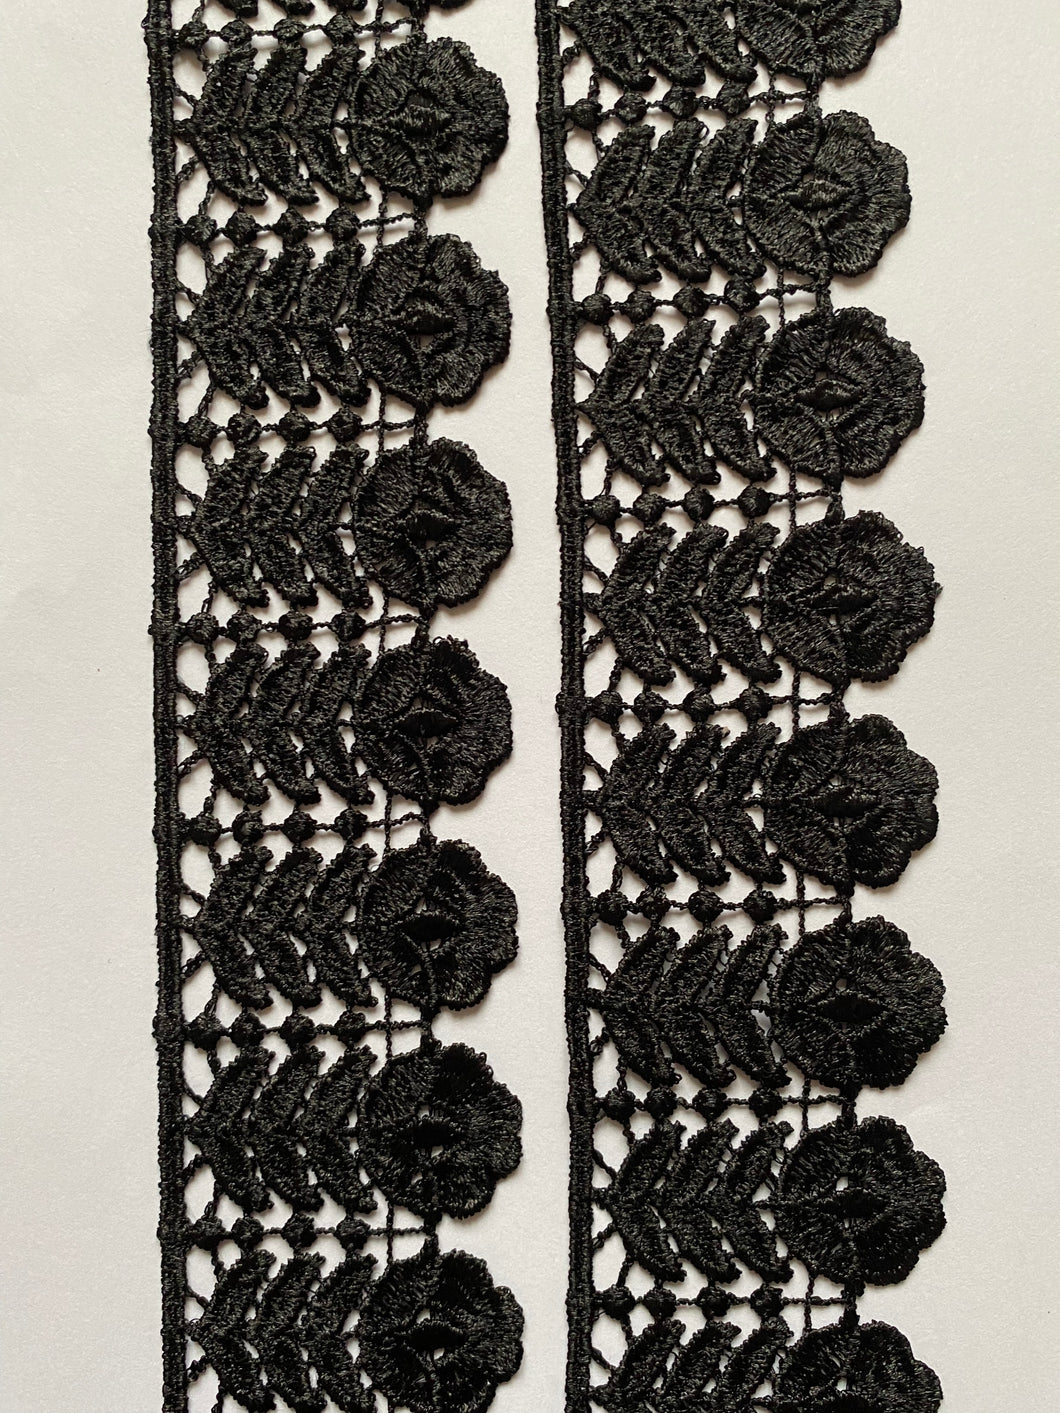 1 yard BLACK Lace Trims 49mm Wide Embroidered Guipure Trimmings Cardmaking Wedding Home Decor Sewing Craft Projects